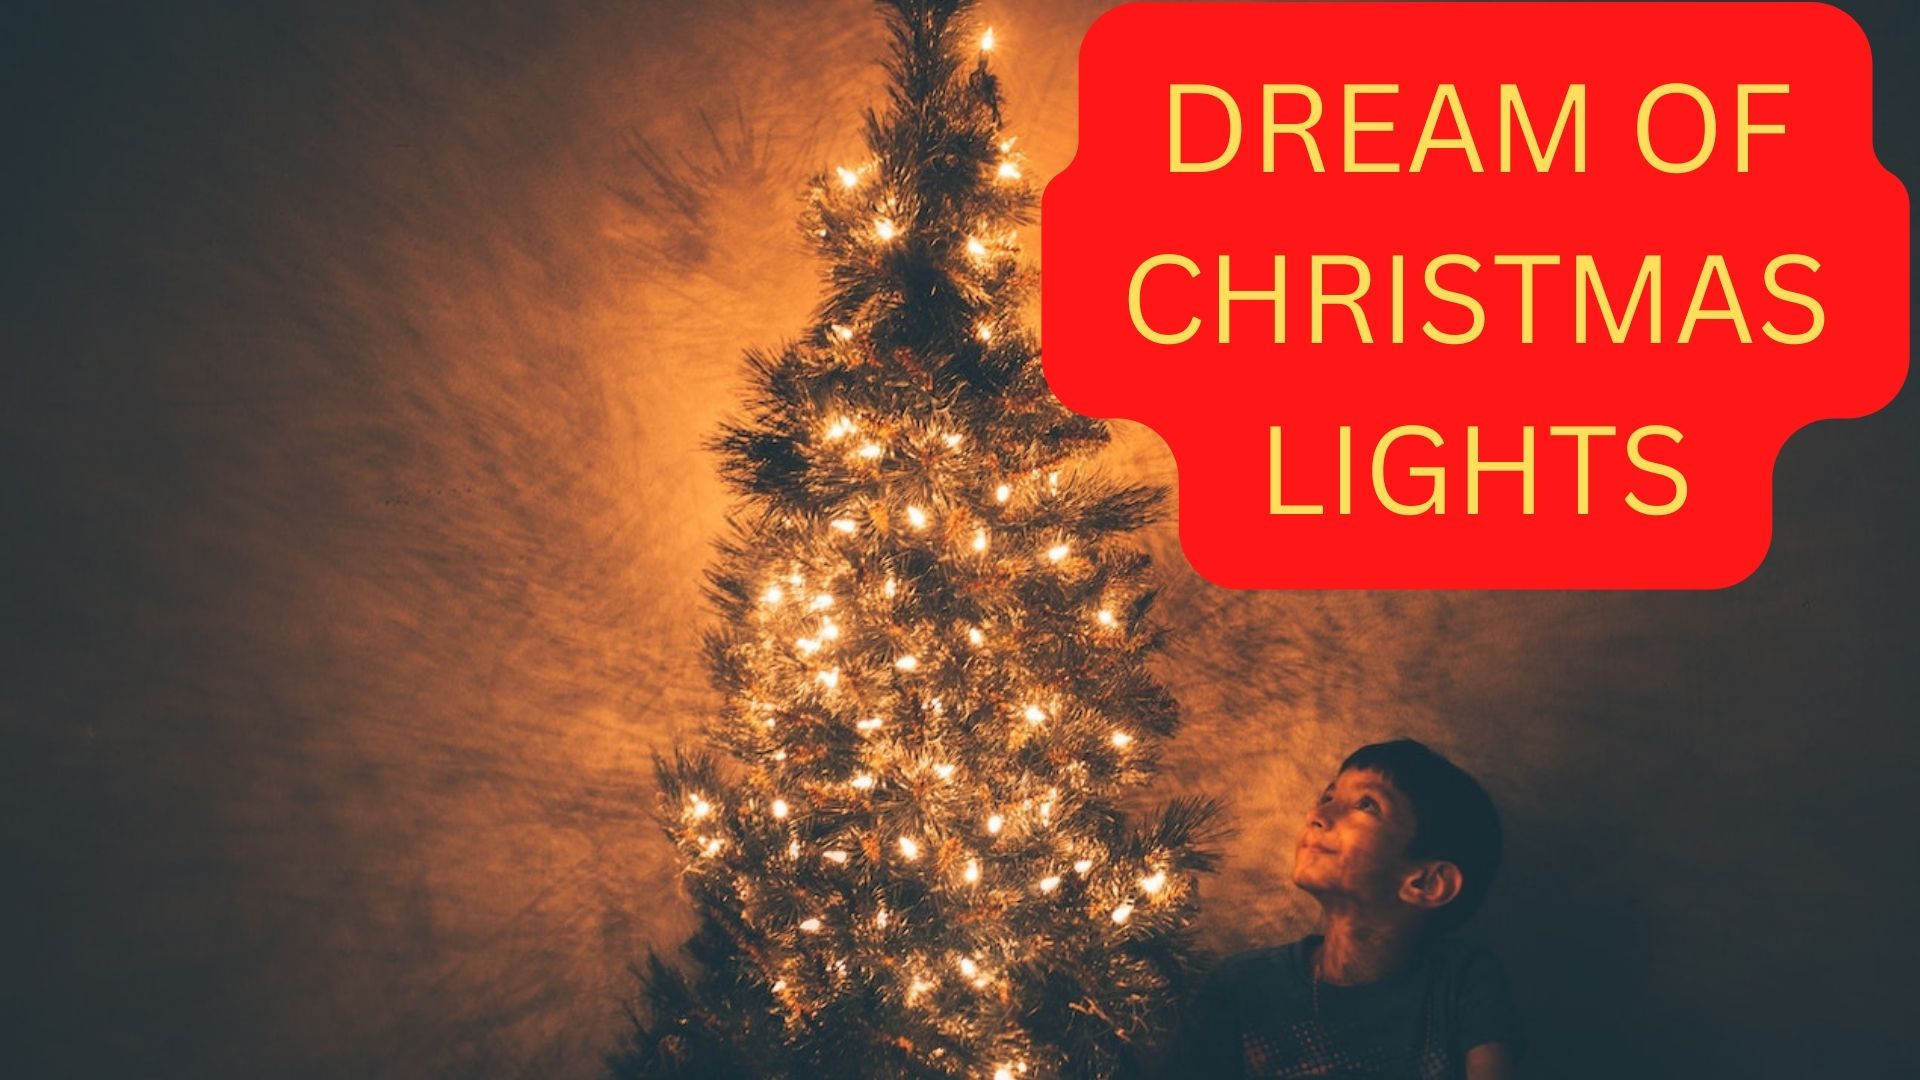 Dream Of Christmas Lights Meaning - To Make Other People Happy